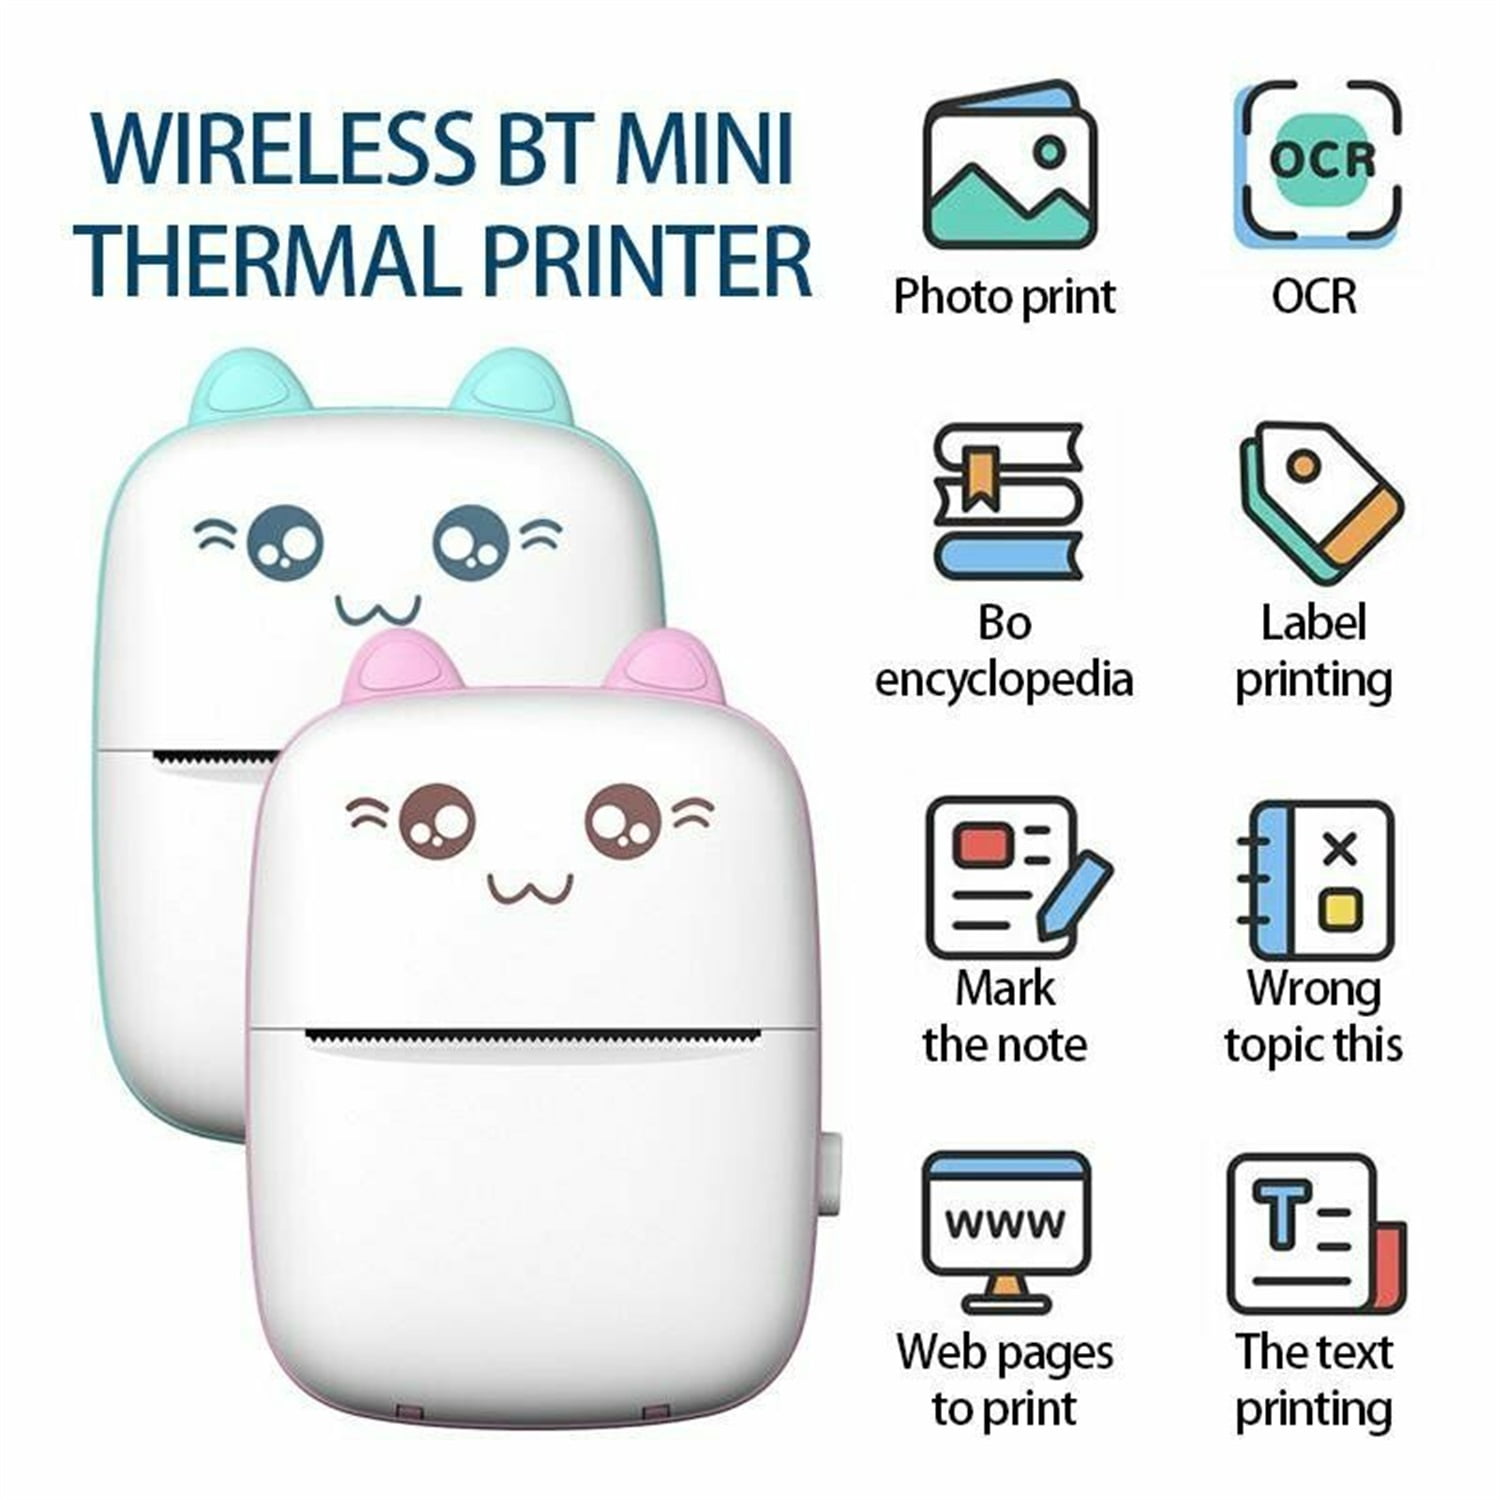 200DPI Wireless Bluetooth 4.1 Thermal Printer Green Messages Lists for Photos Lazmin112 Mini Portable Printer Web Page Printing Labels No Ink Cartridges